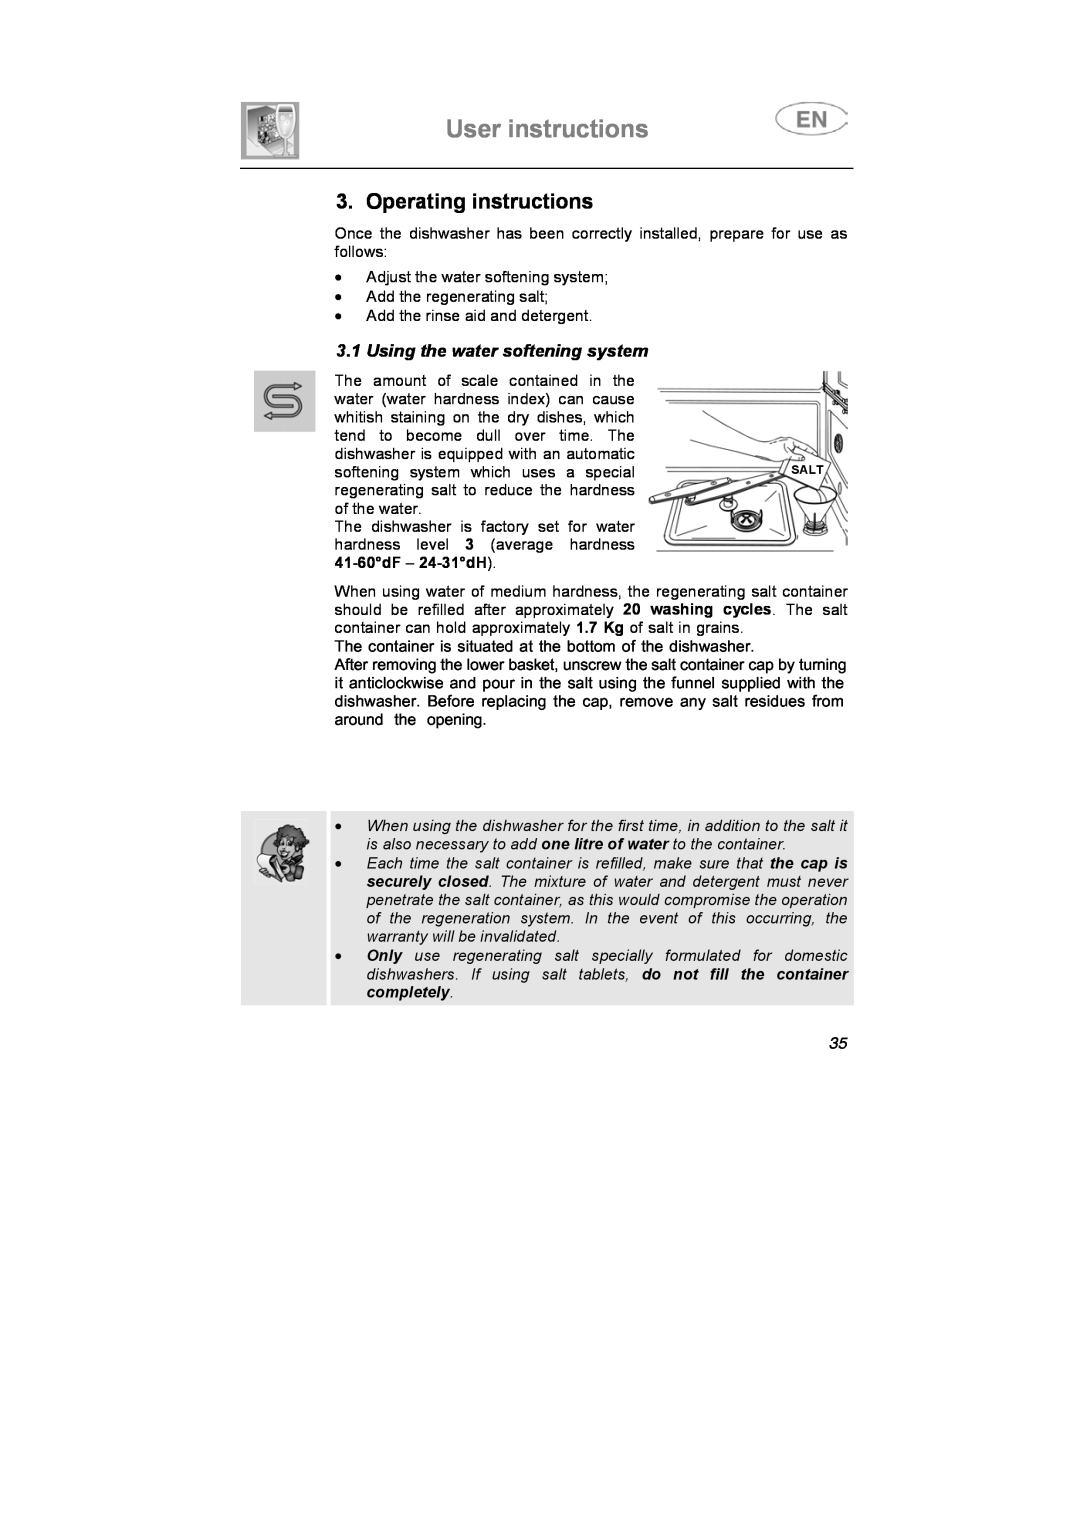 Smeg BLV1RO instruction manual Operating instructions, Using the water softening system, User instructions 